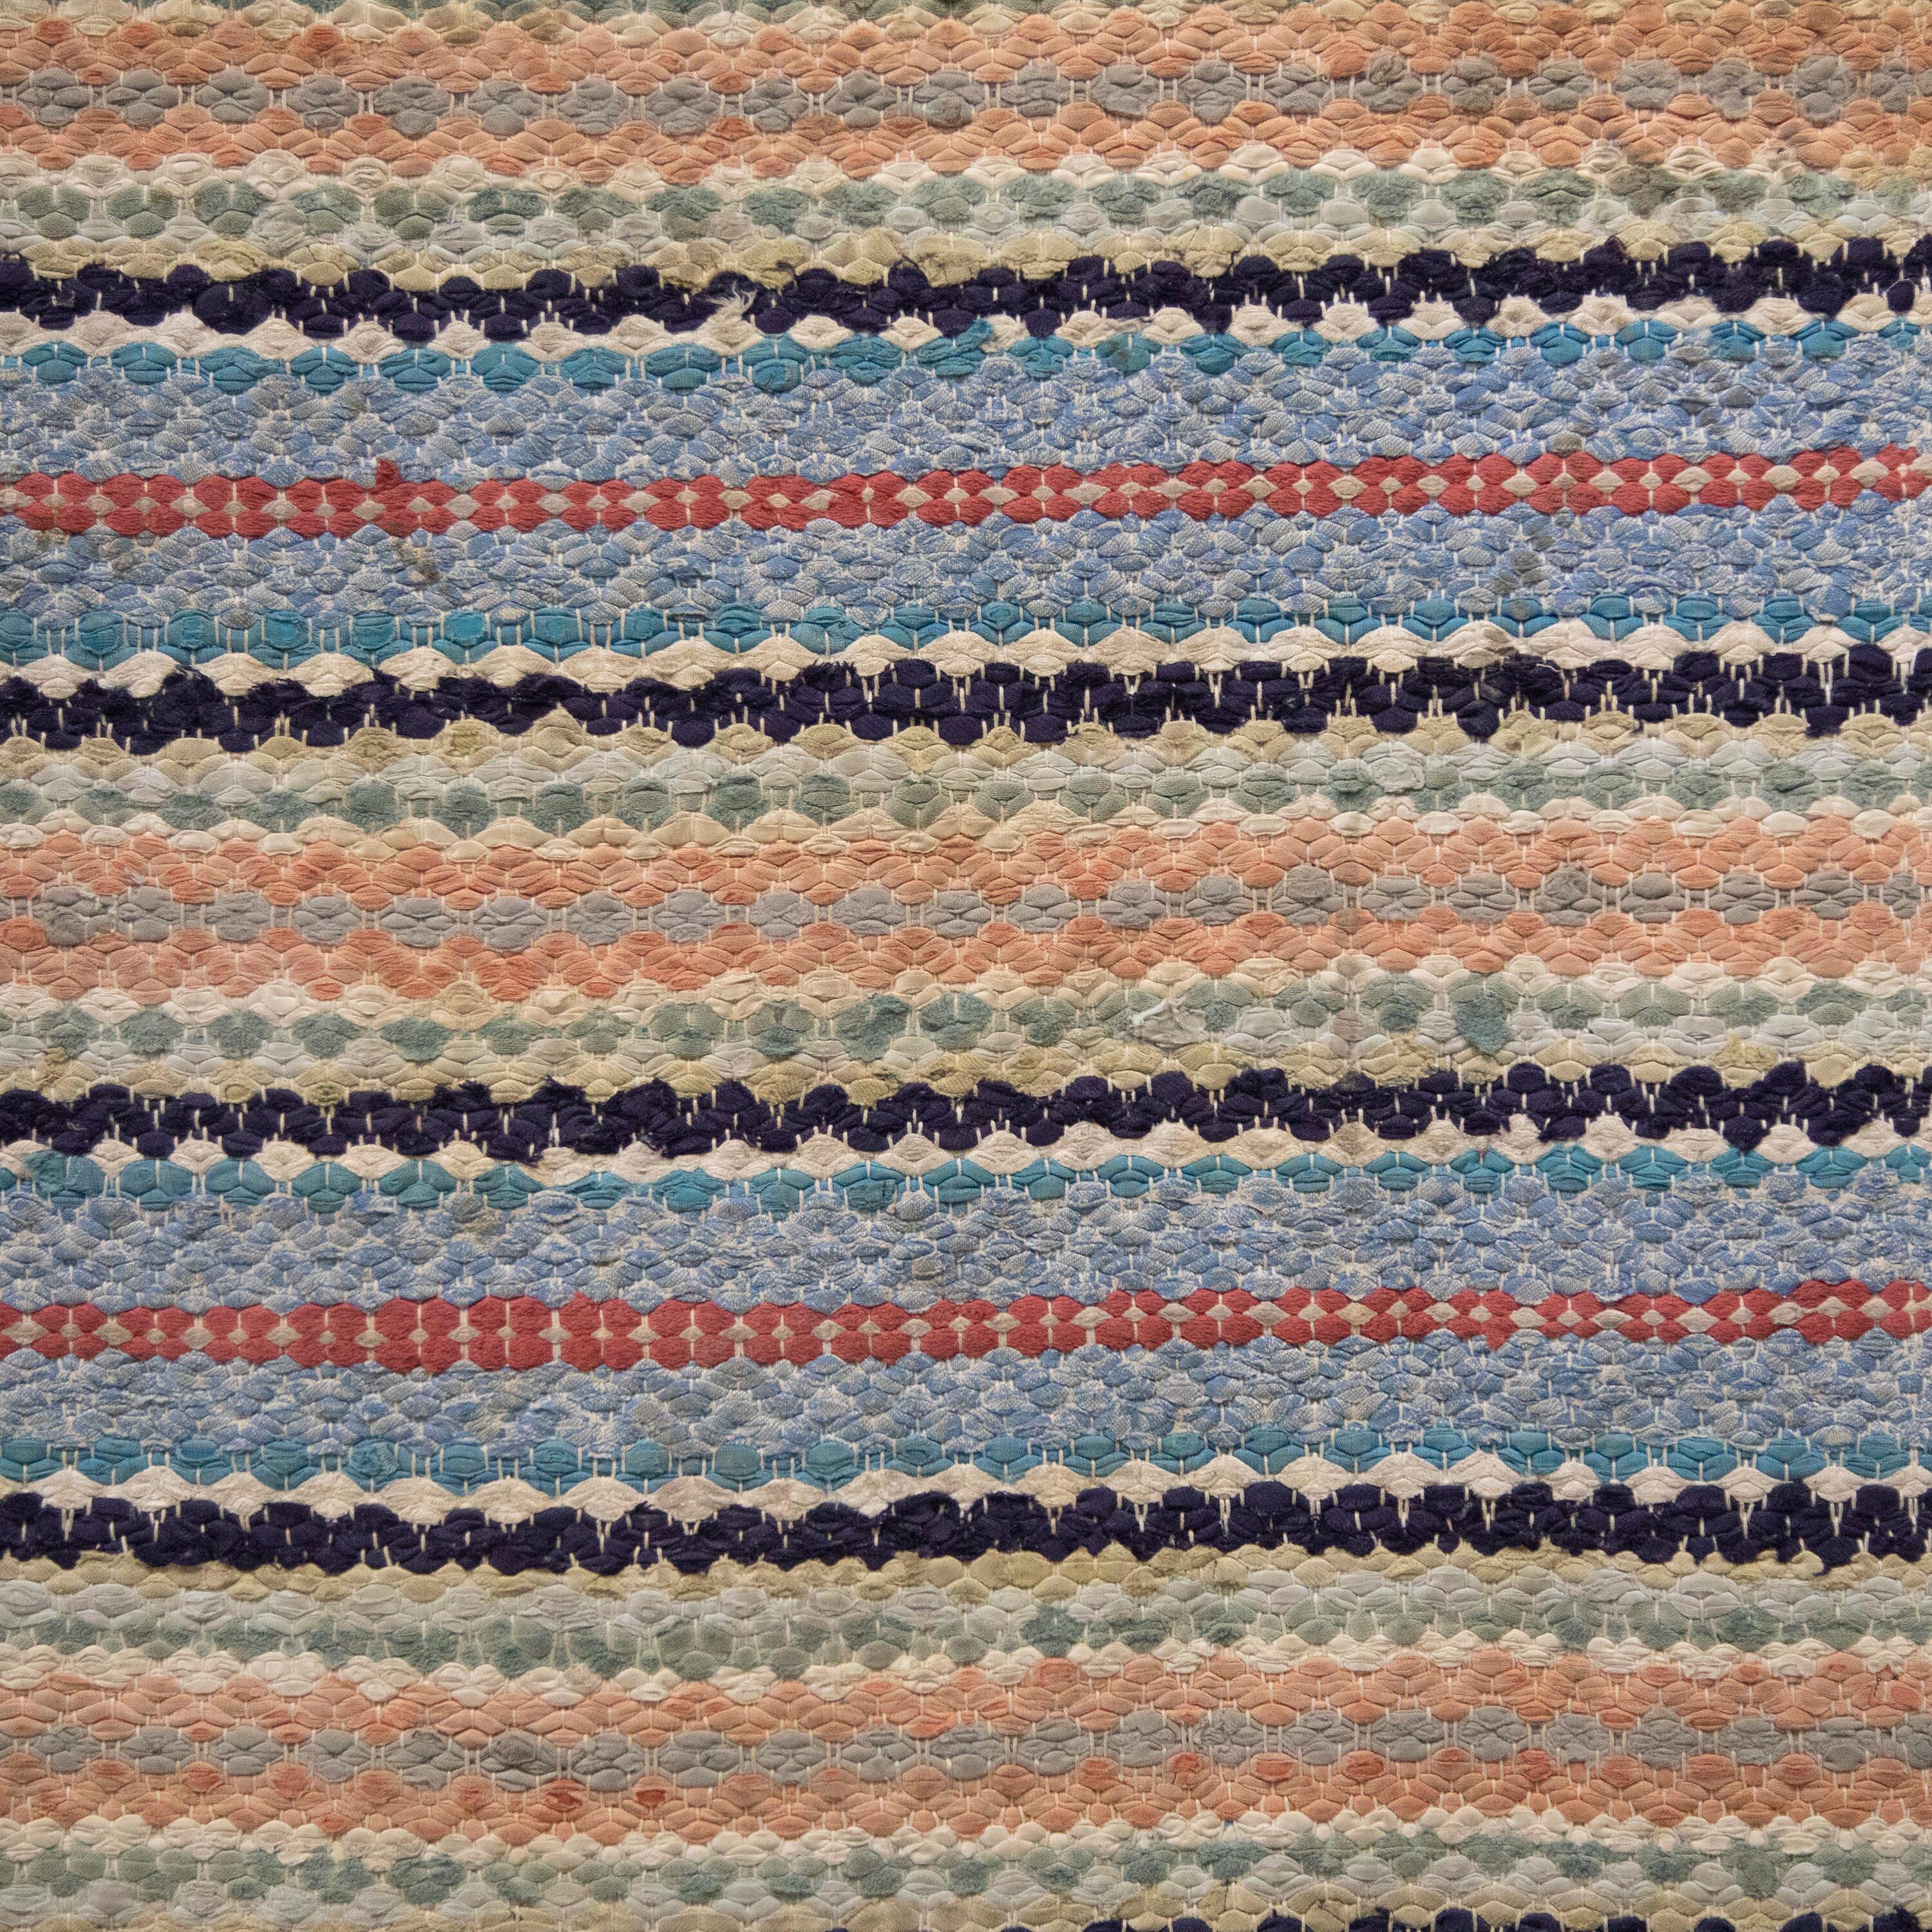 20th Century Swedish rag rug. Featuring a stripe design in muted tones of blue, black, red, and peach. This rug is machine washable at 30 degrees.
RT6024482.